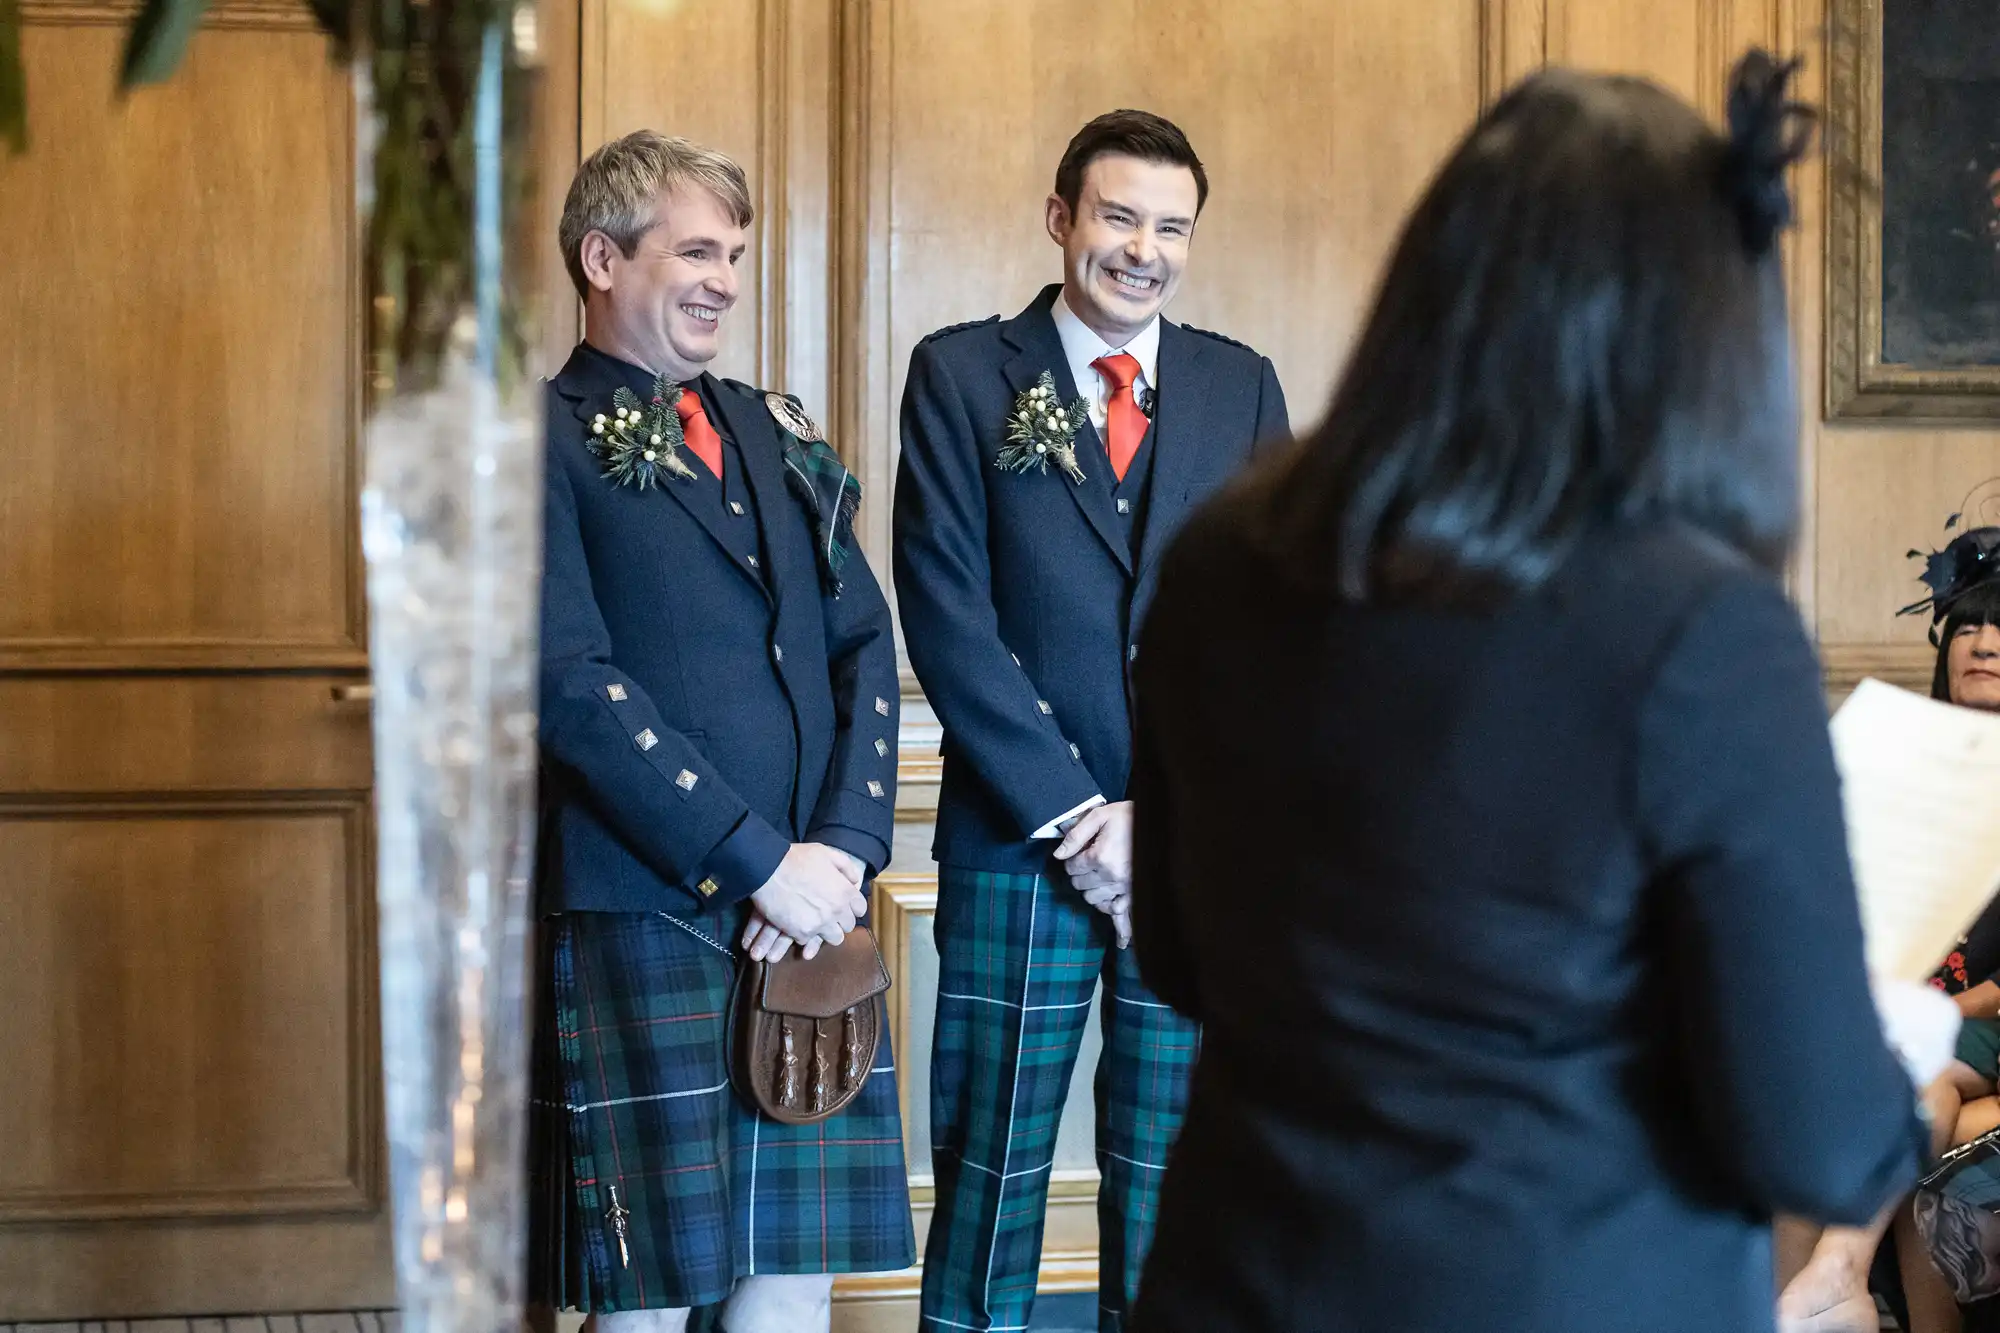 Two men in tartan kilts, decorated with floral boutonnieres, stand smiling in a room with wooden paneling. A woman in the foreground has her back to the camera and appears to be speaking.